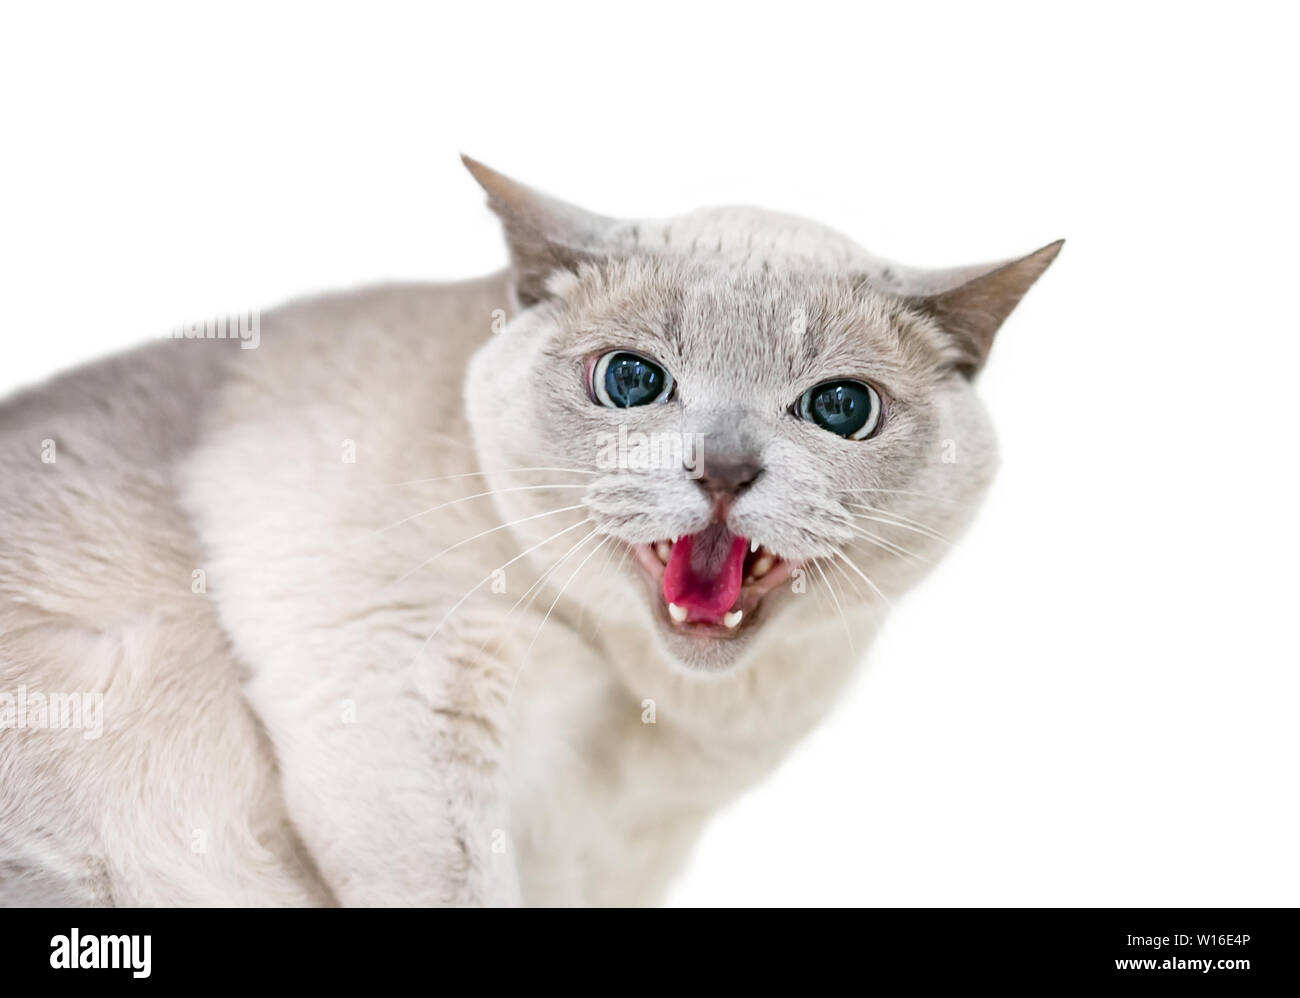 An angry Tonkinese cat hissing Stock Photo